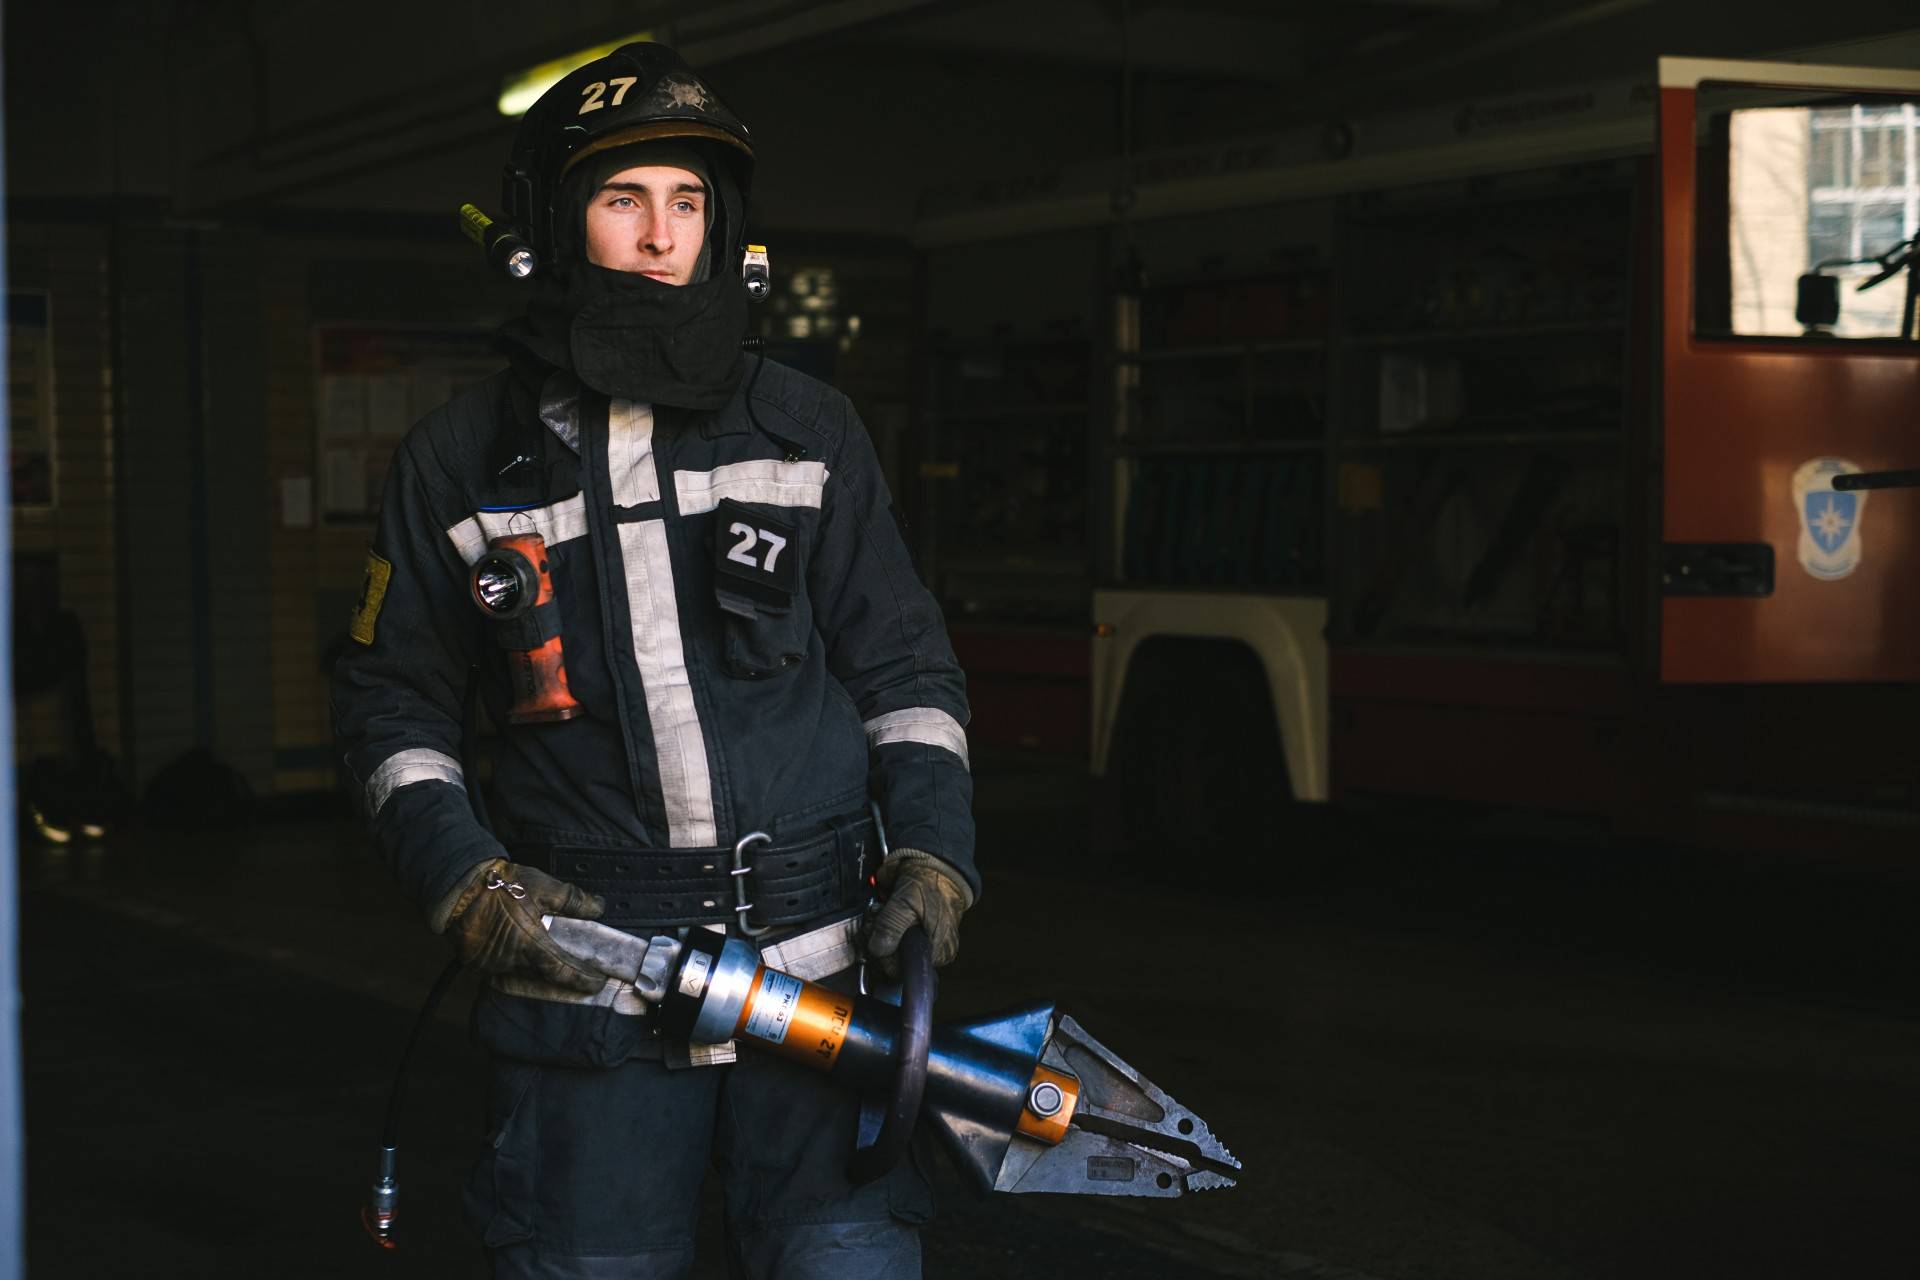 Firefighter with job equipment